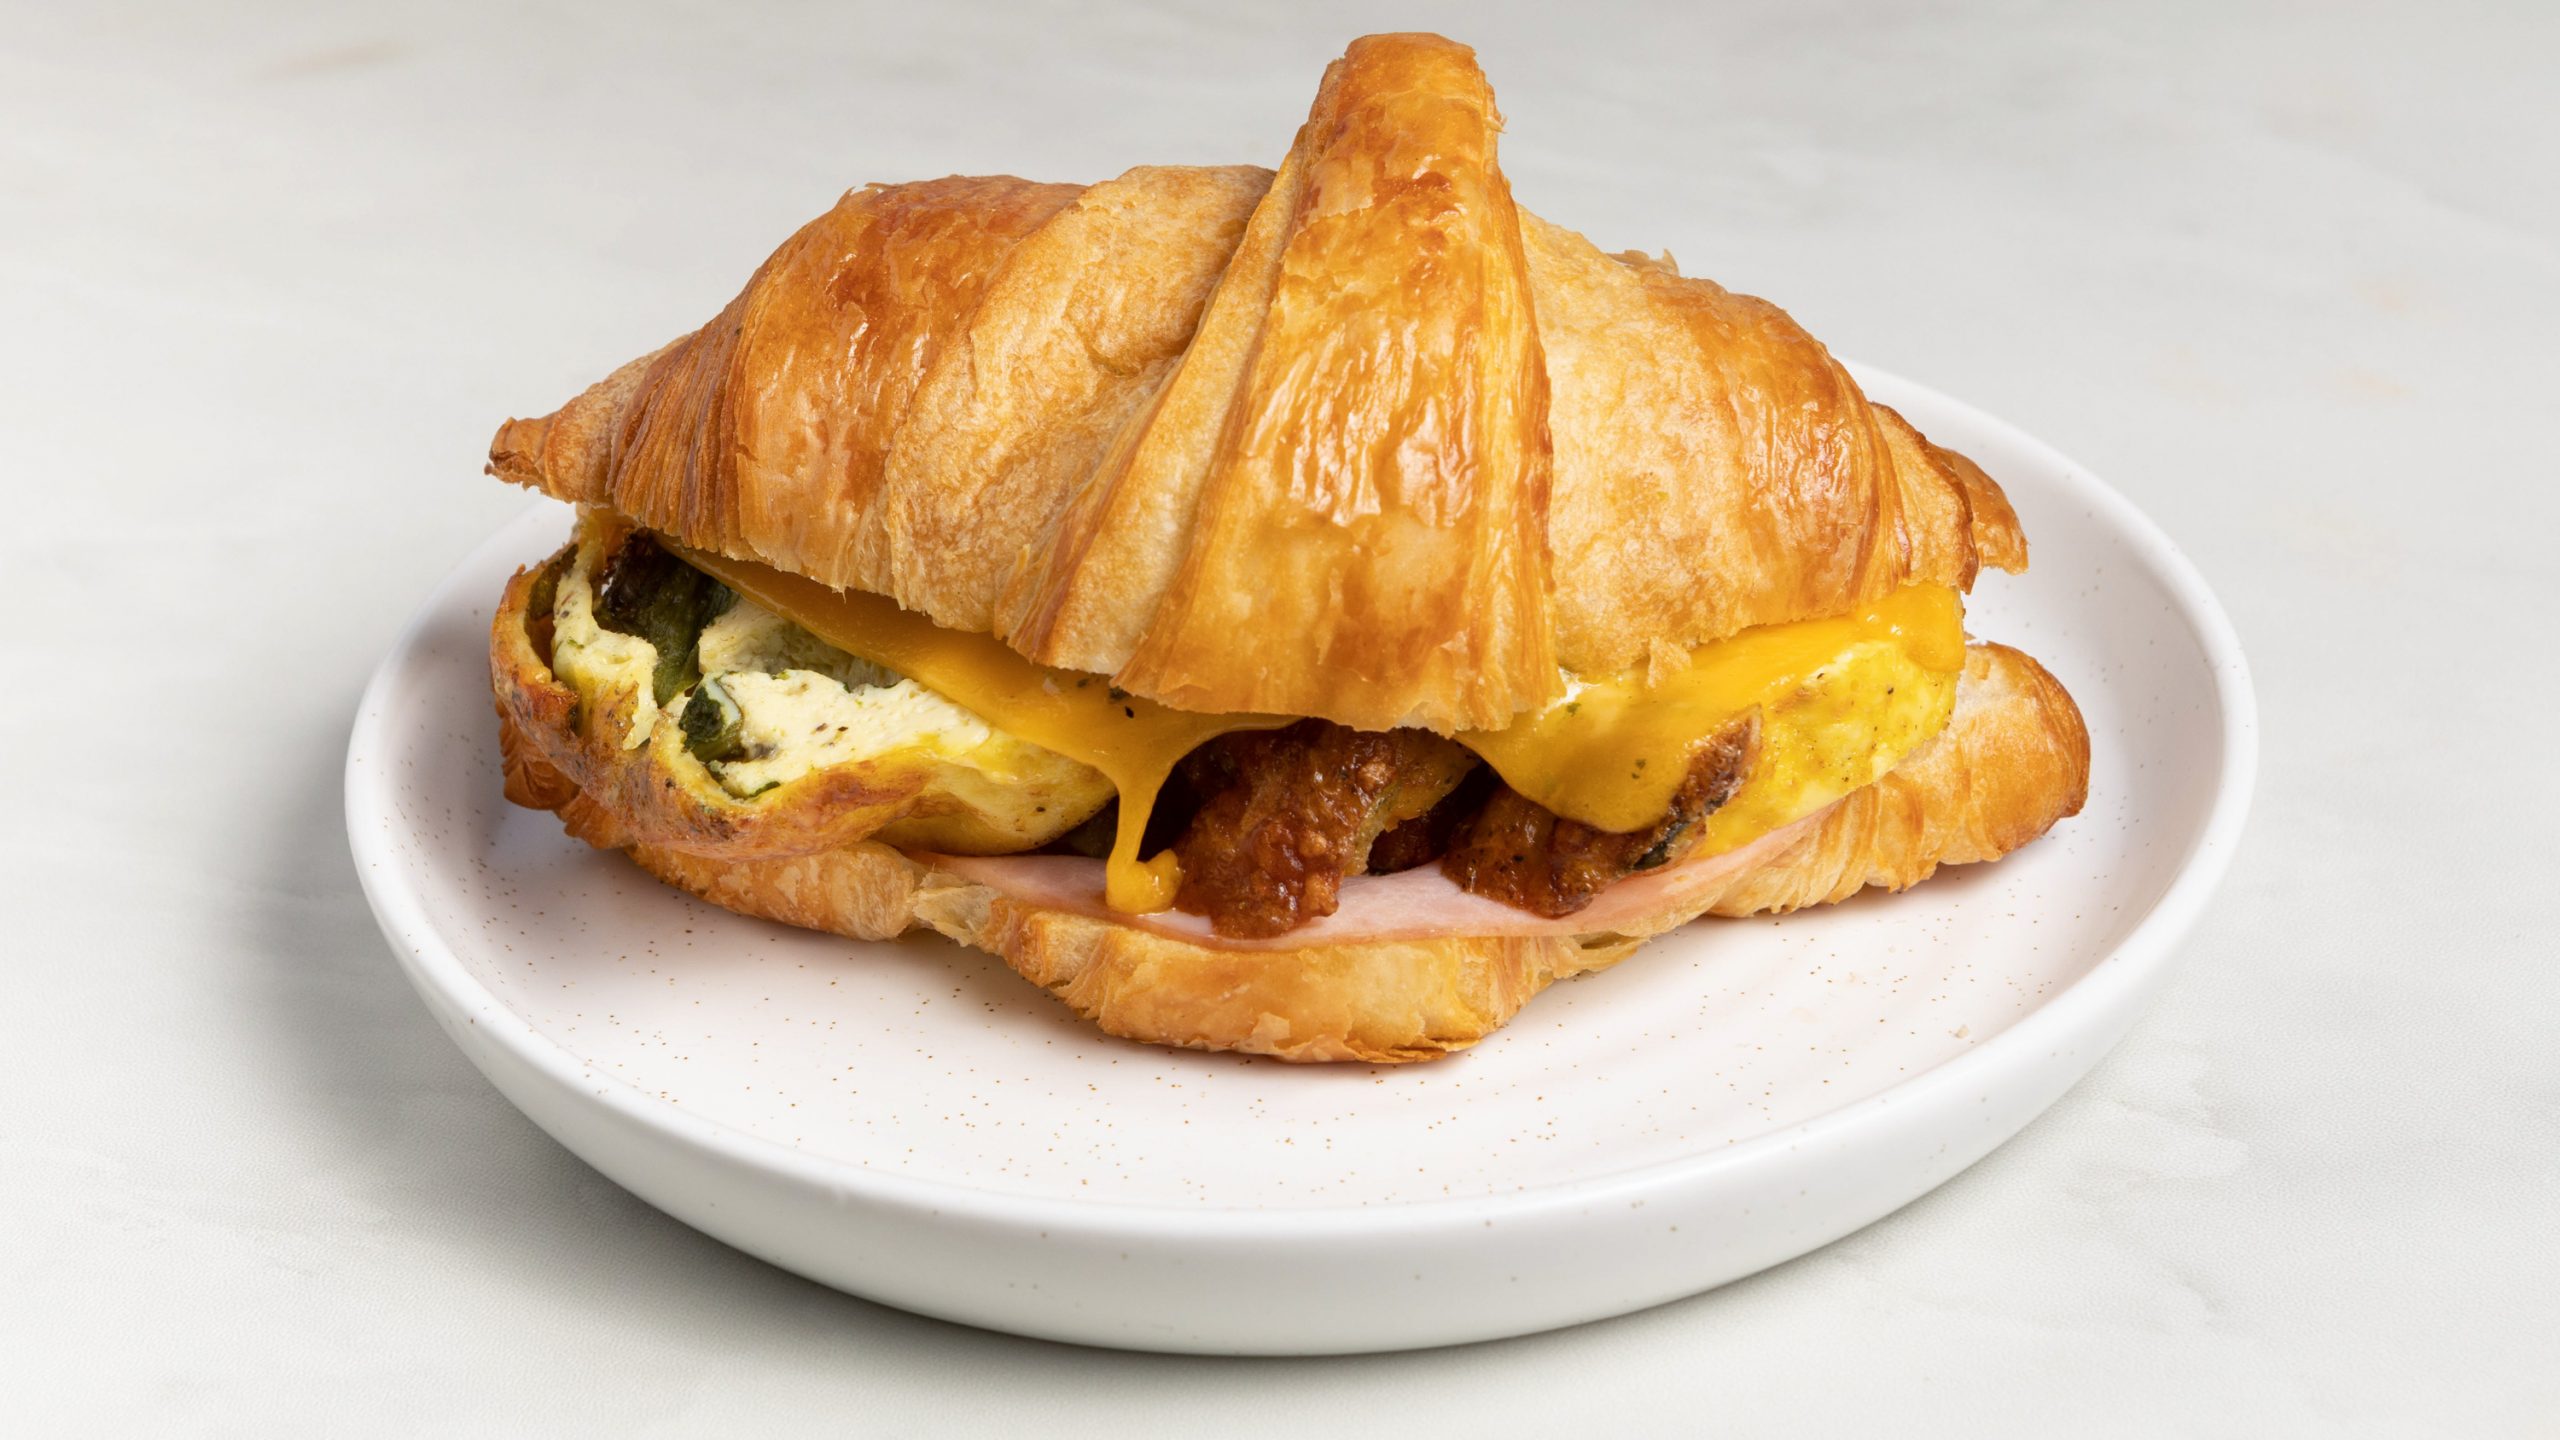 AM AND CHEDDAR EGG CROISSANT.